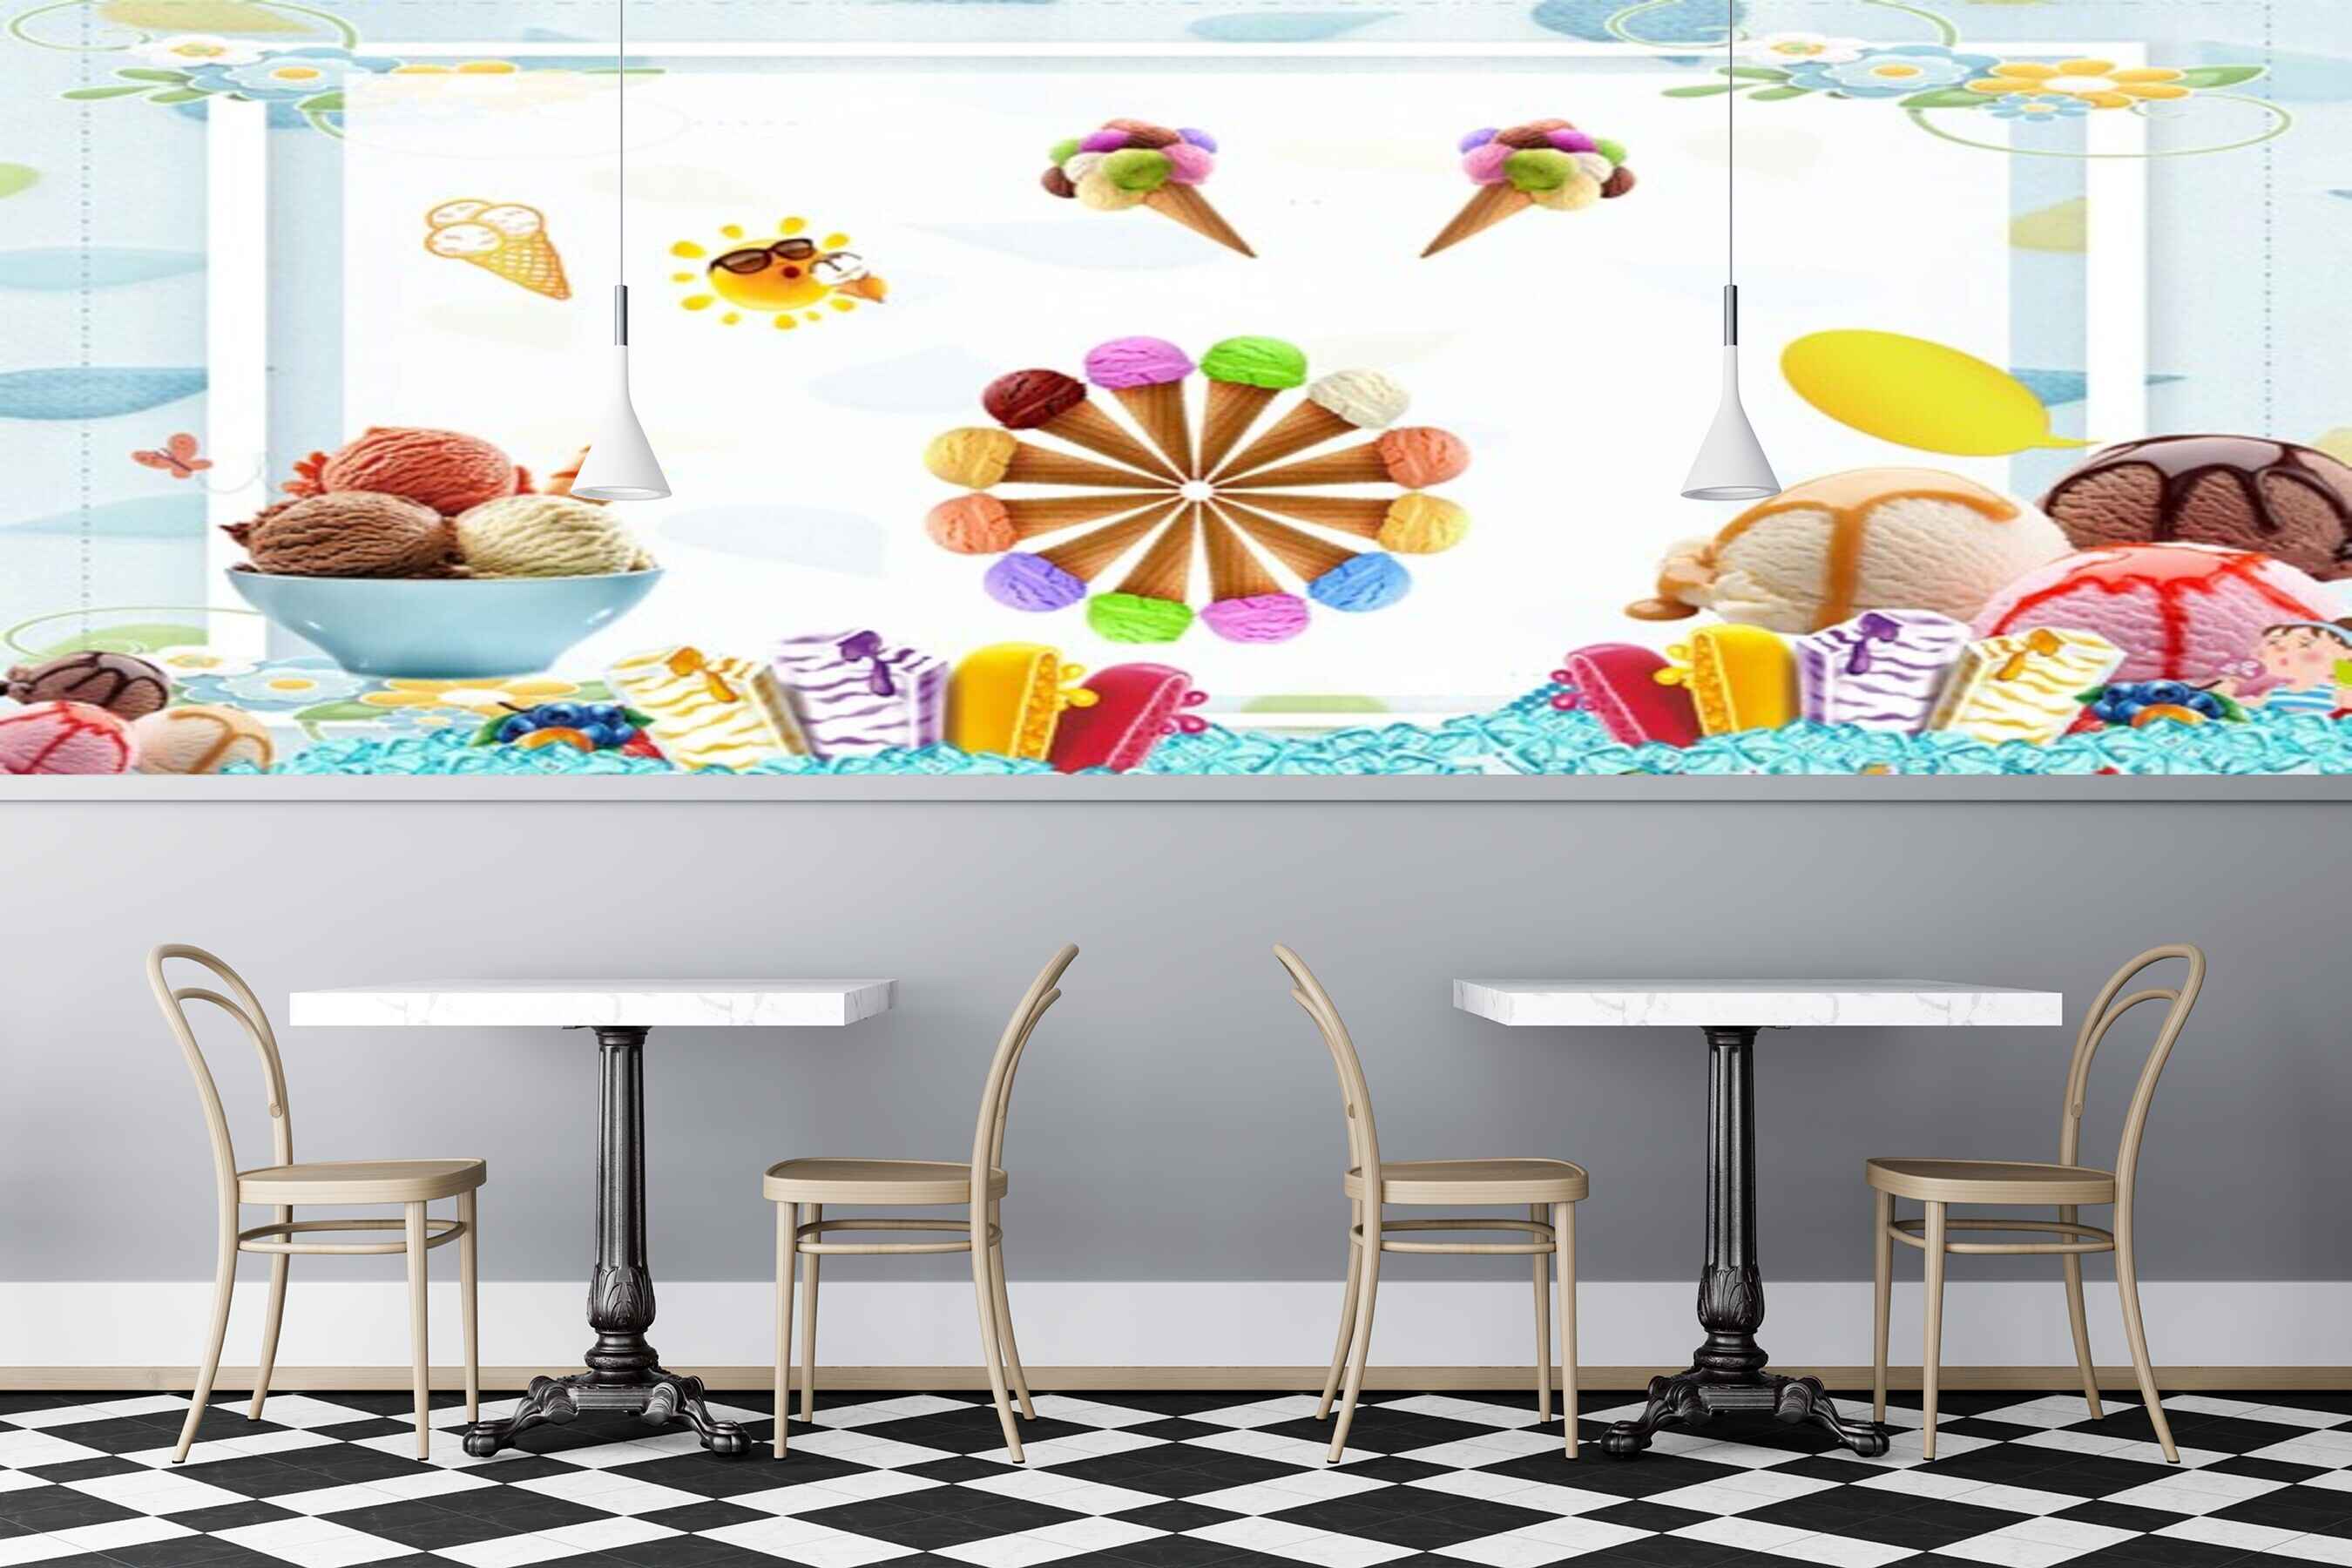 Avikalp MWZ3031 Ice Creams Cones Scoops HD Wallpaper for Cafe Restaurant